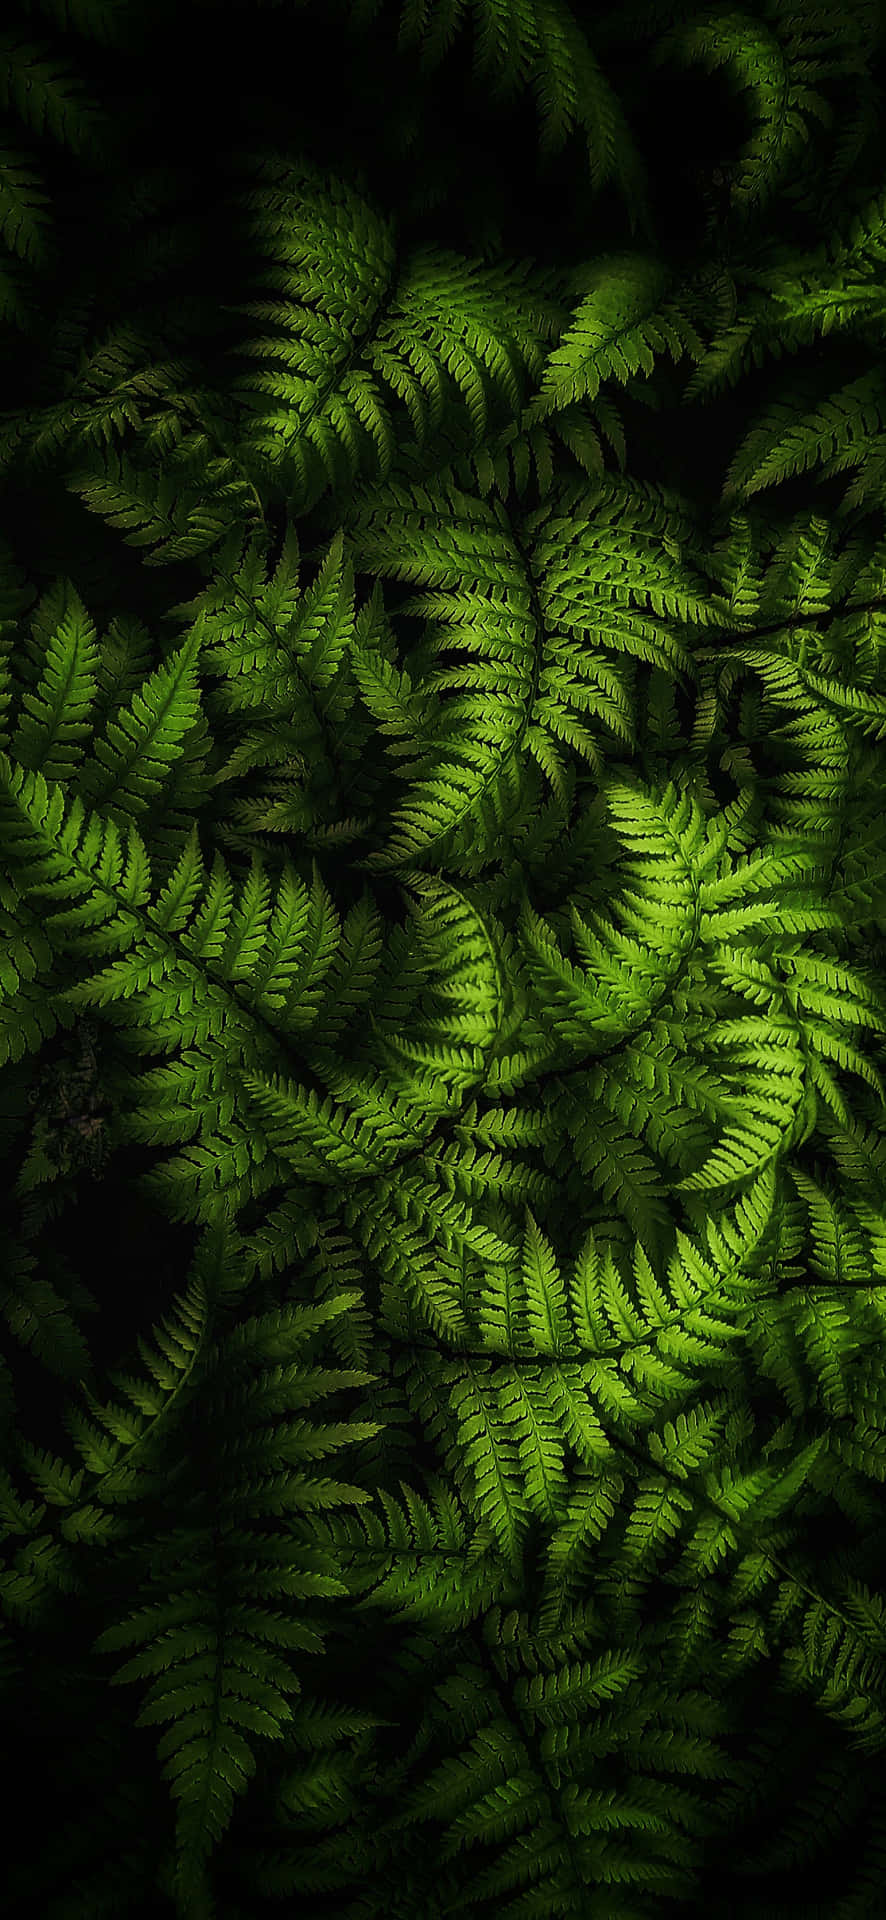 Download Fern Leaves On A Dark Background Wallpaper | Wallpapers.com